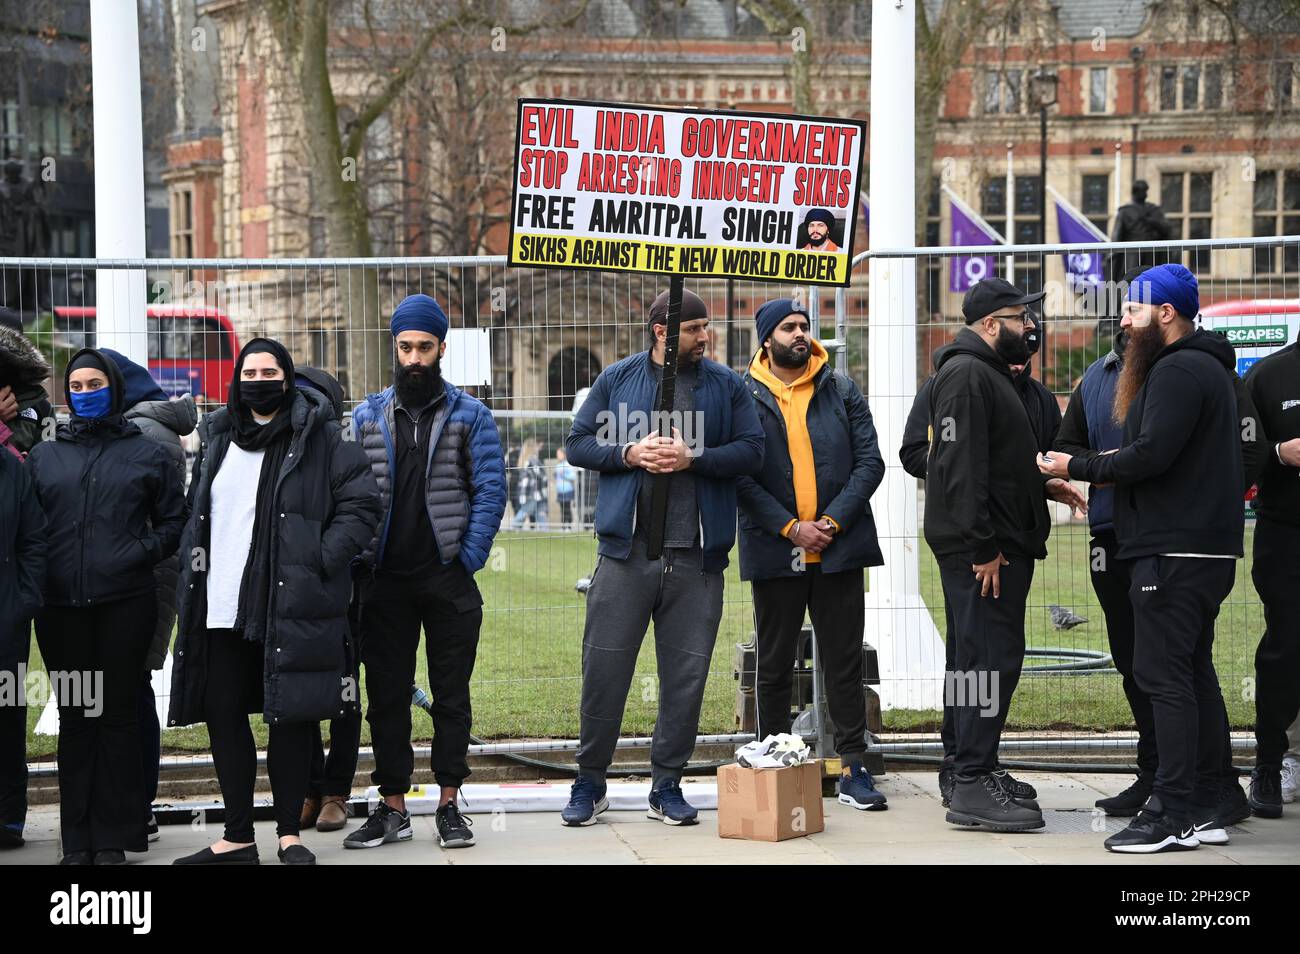 Protest the Evil India government stop arresting innocent Sikhs, London, UK Credit: See Li/Picture Capital/Alamy Live News Stock Photo